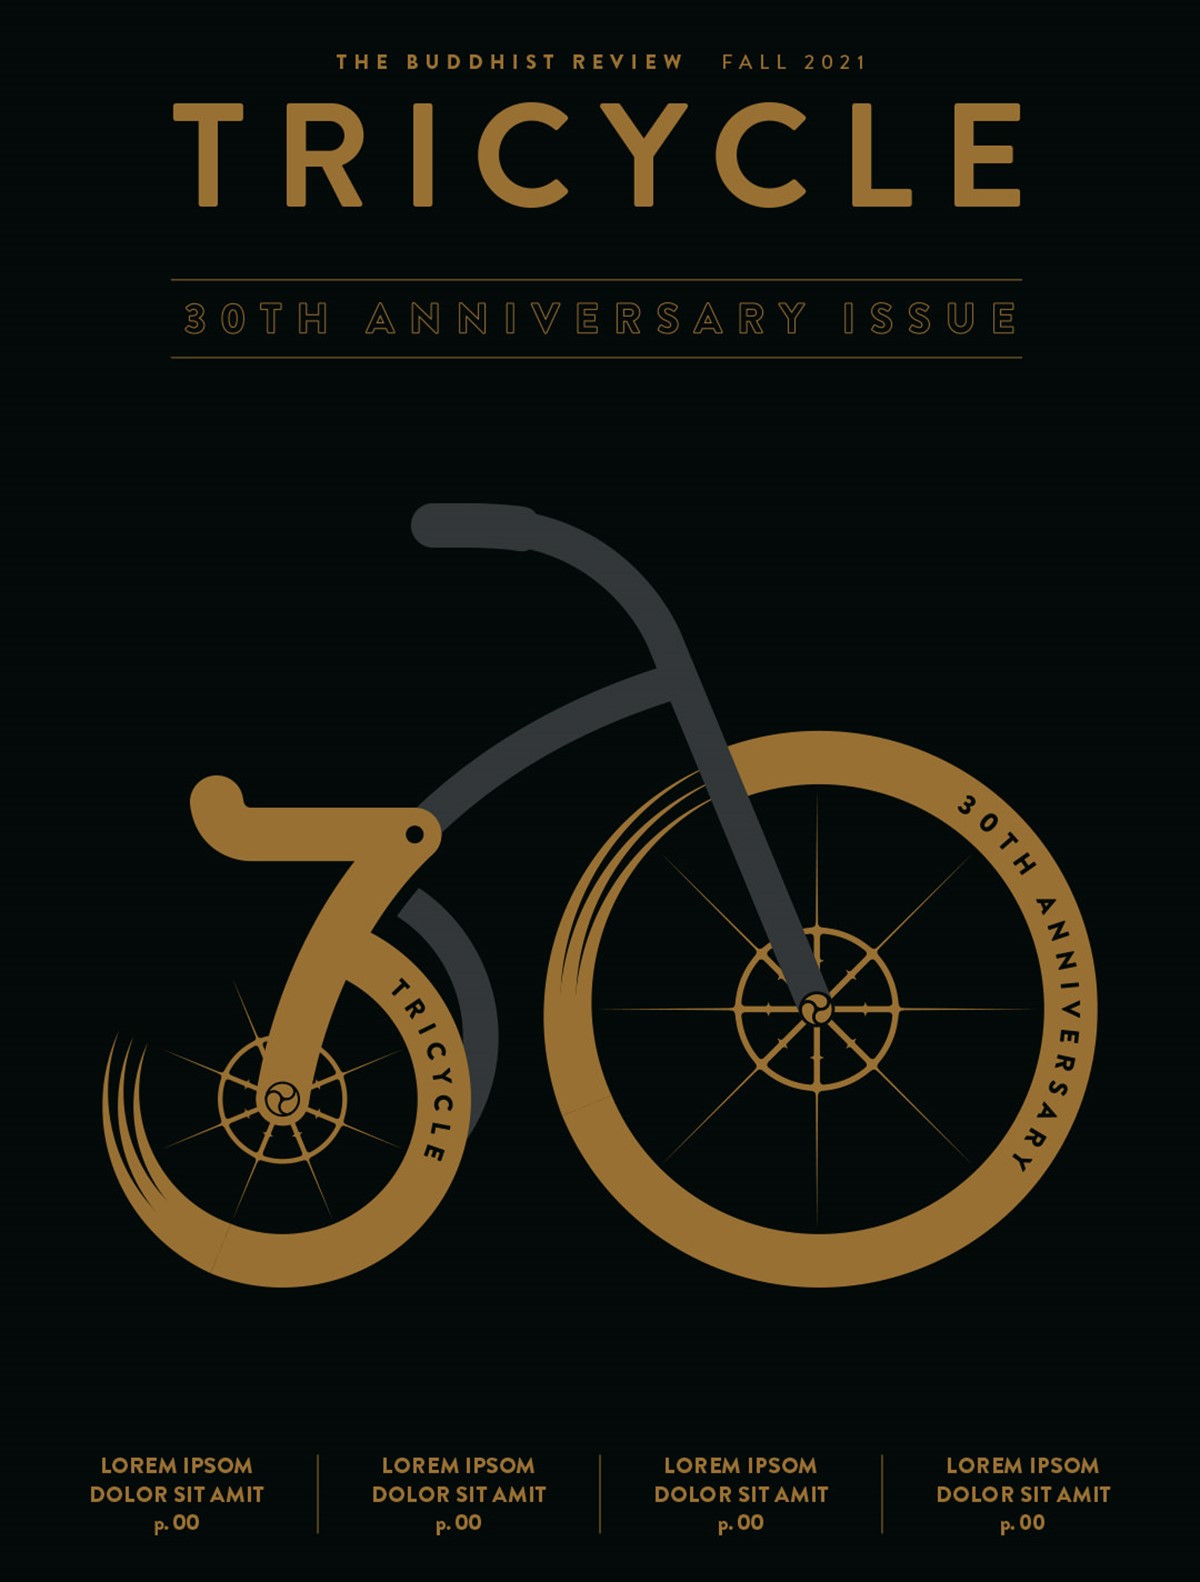 Tricycle magazine. 30th anniversary. Typographic trike design on black by Superfried.